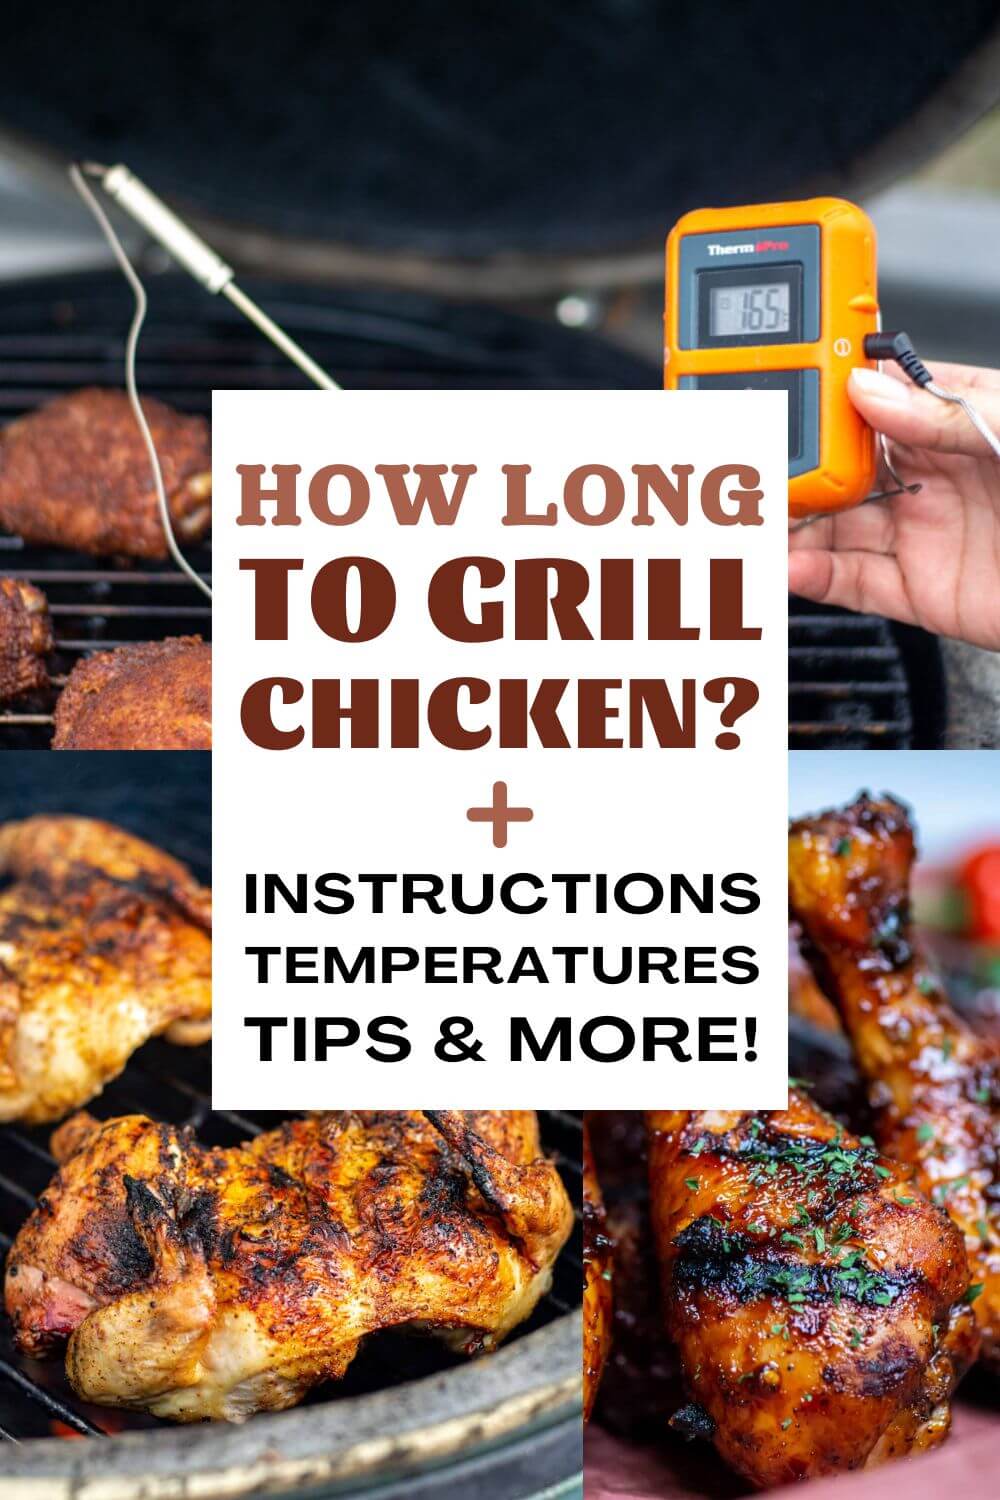 How Long To Grill Chicken - Complete Guide For Grilling Chicken